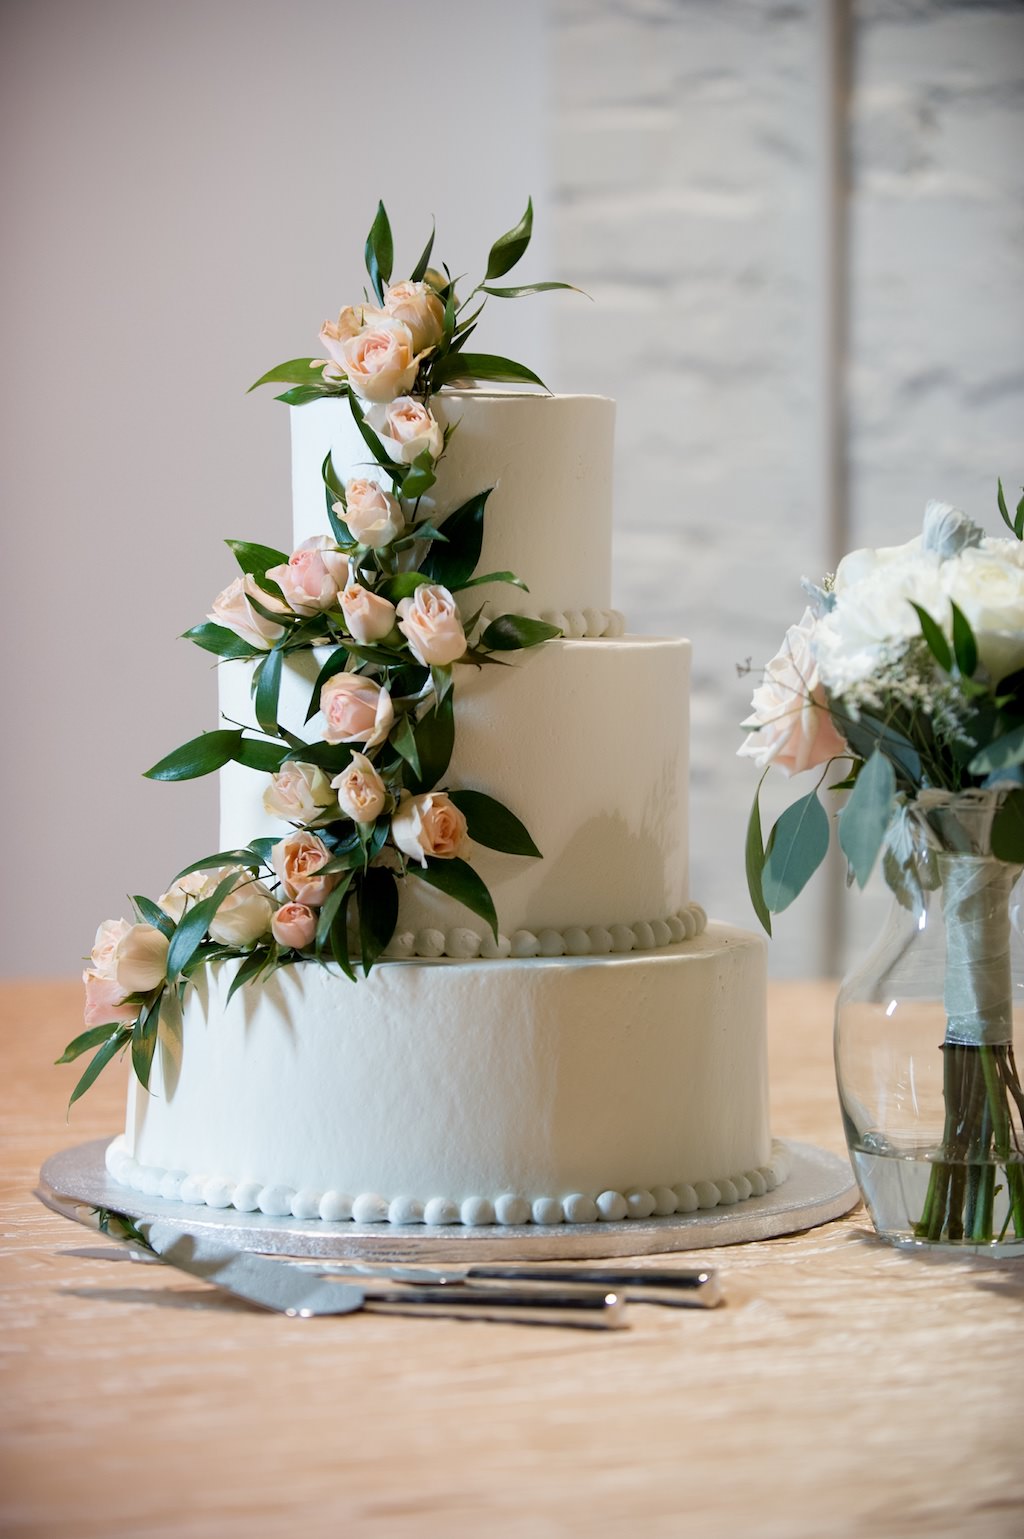 Three Tier White Wedding Cake with Cascading Blush Pink Roses and Greenery | Tampa Bay Photographer Andi Diamond Photography